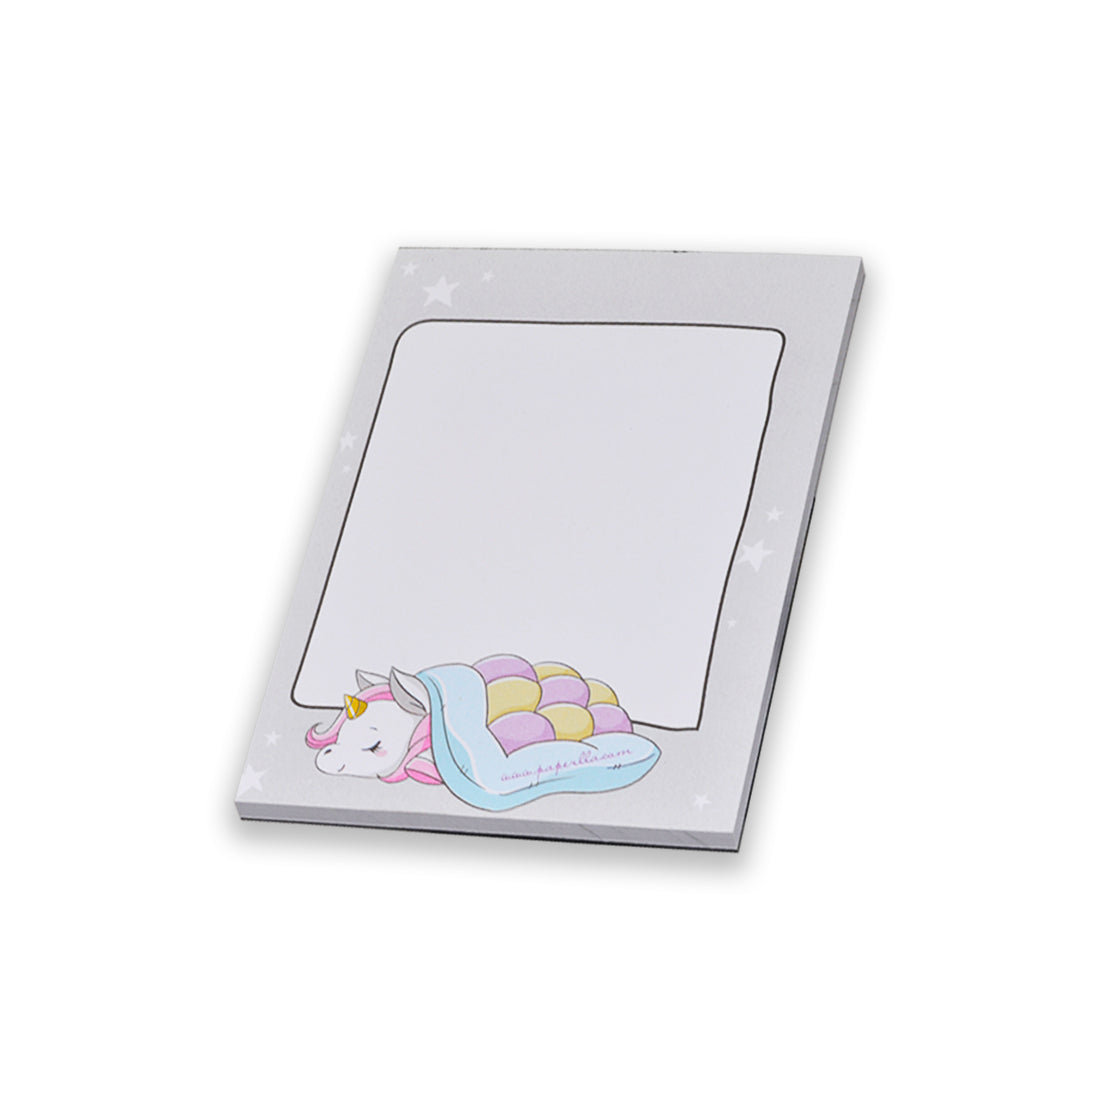 JOURNAL PLANNER NOTEPADS DIARY, UNDATED TO DO LIST TRAVEL ORGANIZER UNICORN GIFT FOR KIDS, SET OF 8